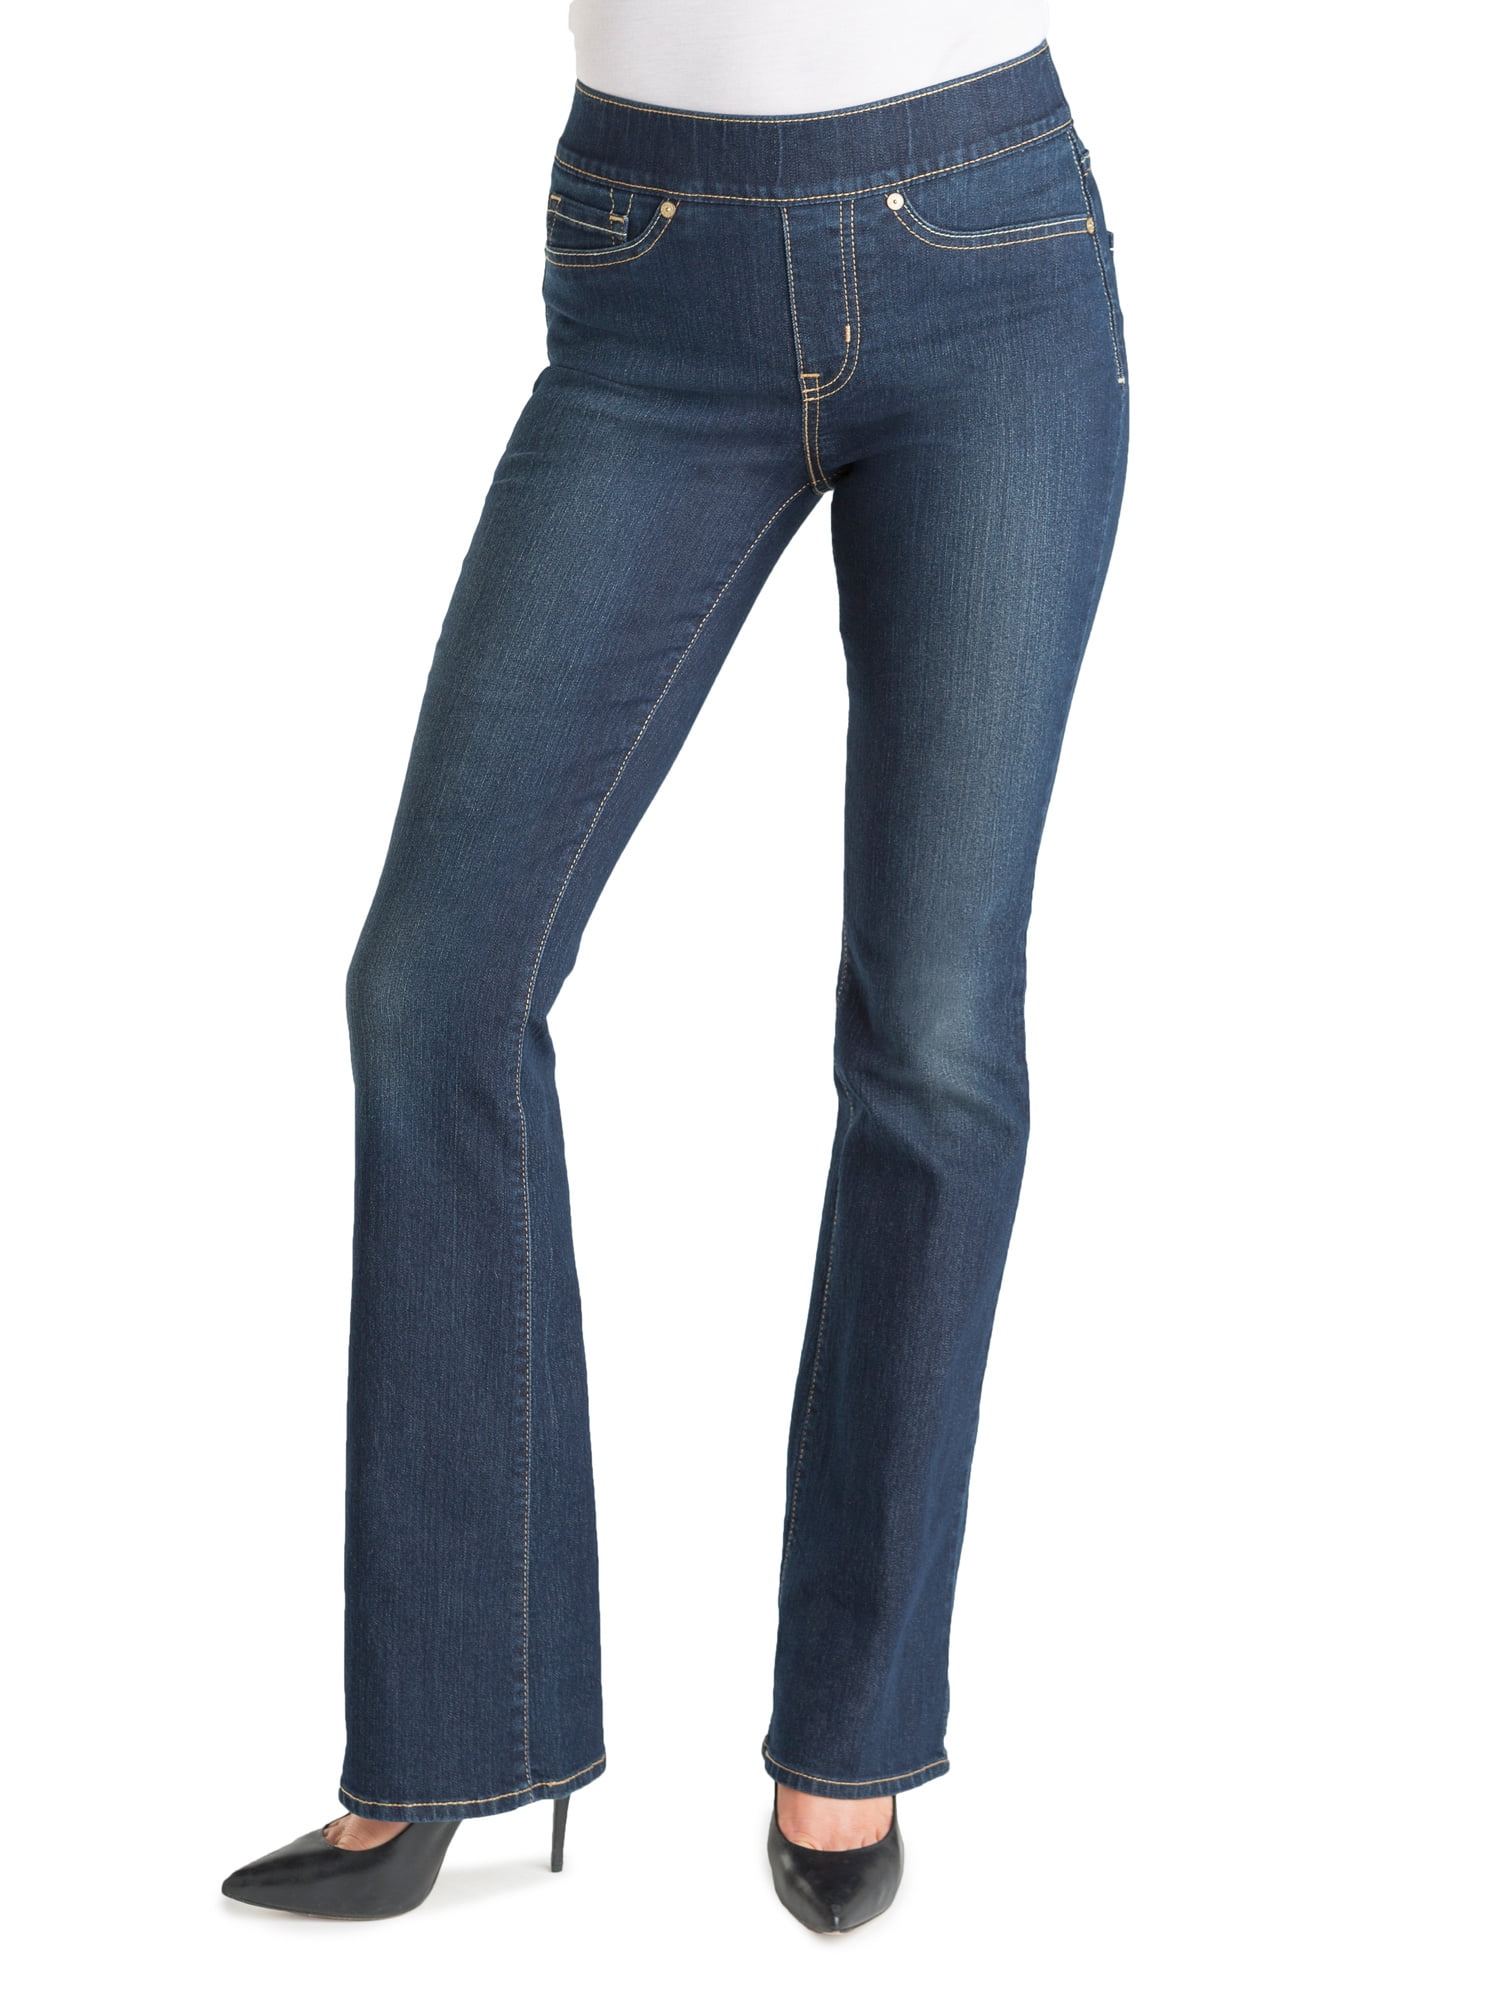 women's pull on jeans by levi strauss